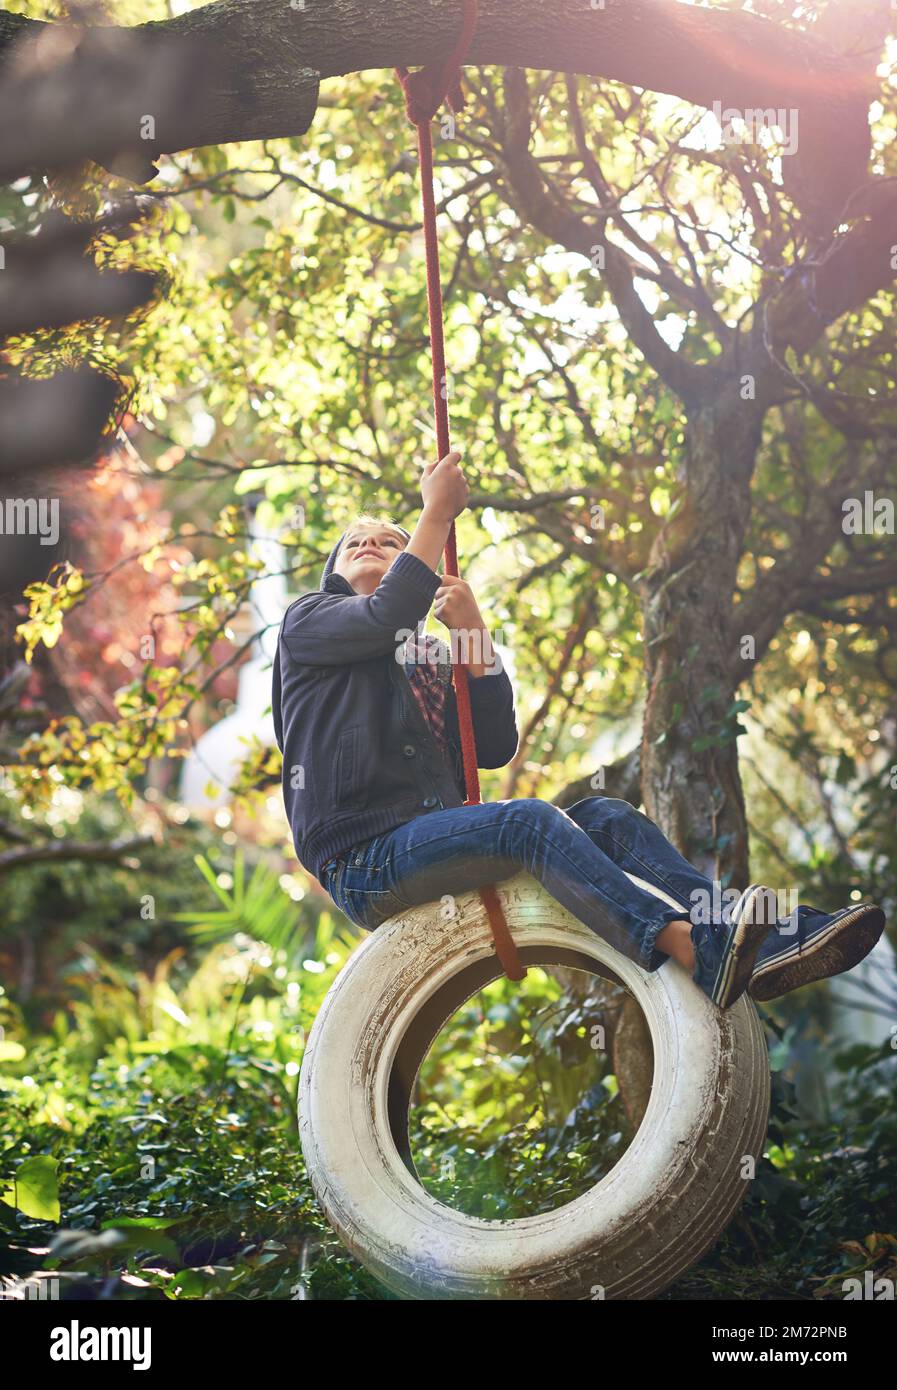 This is the original playstation. A preteen boy swinging on a tyre swing in the garden. Stock Photo